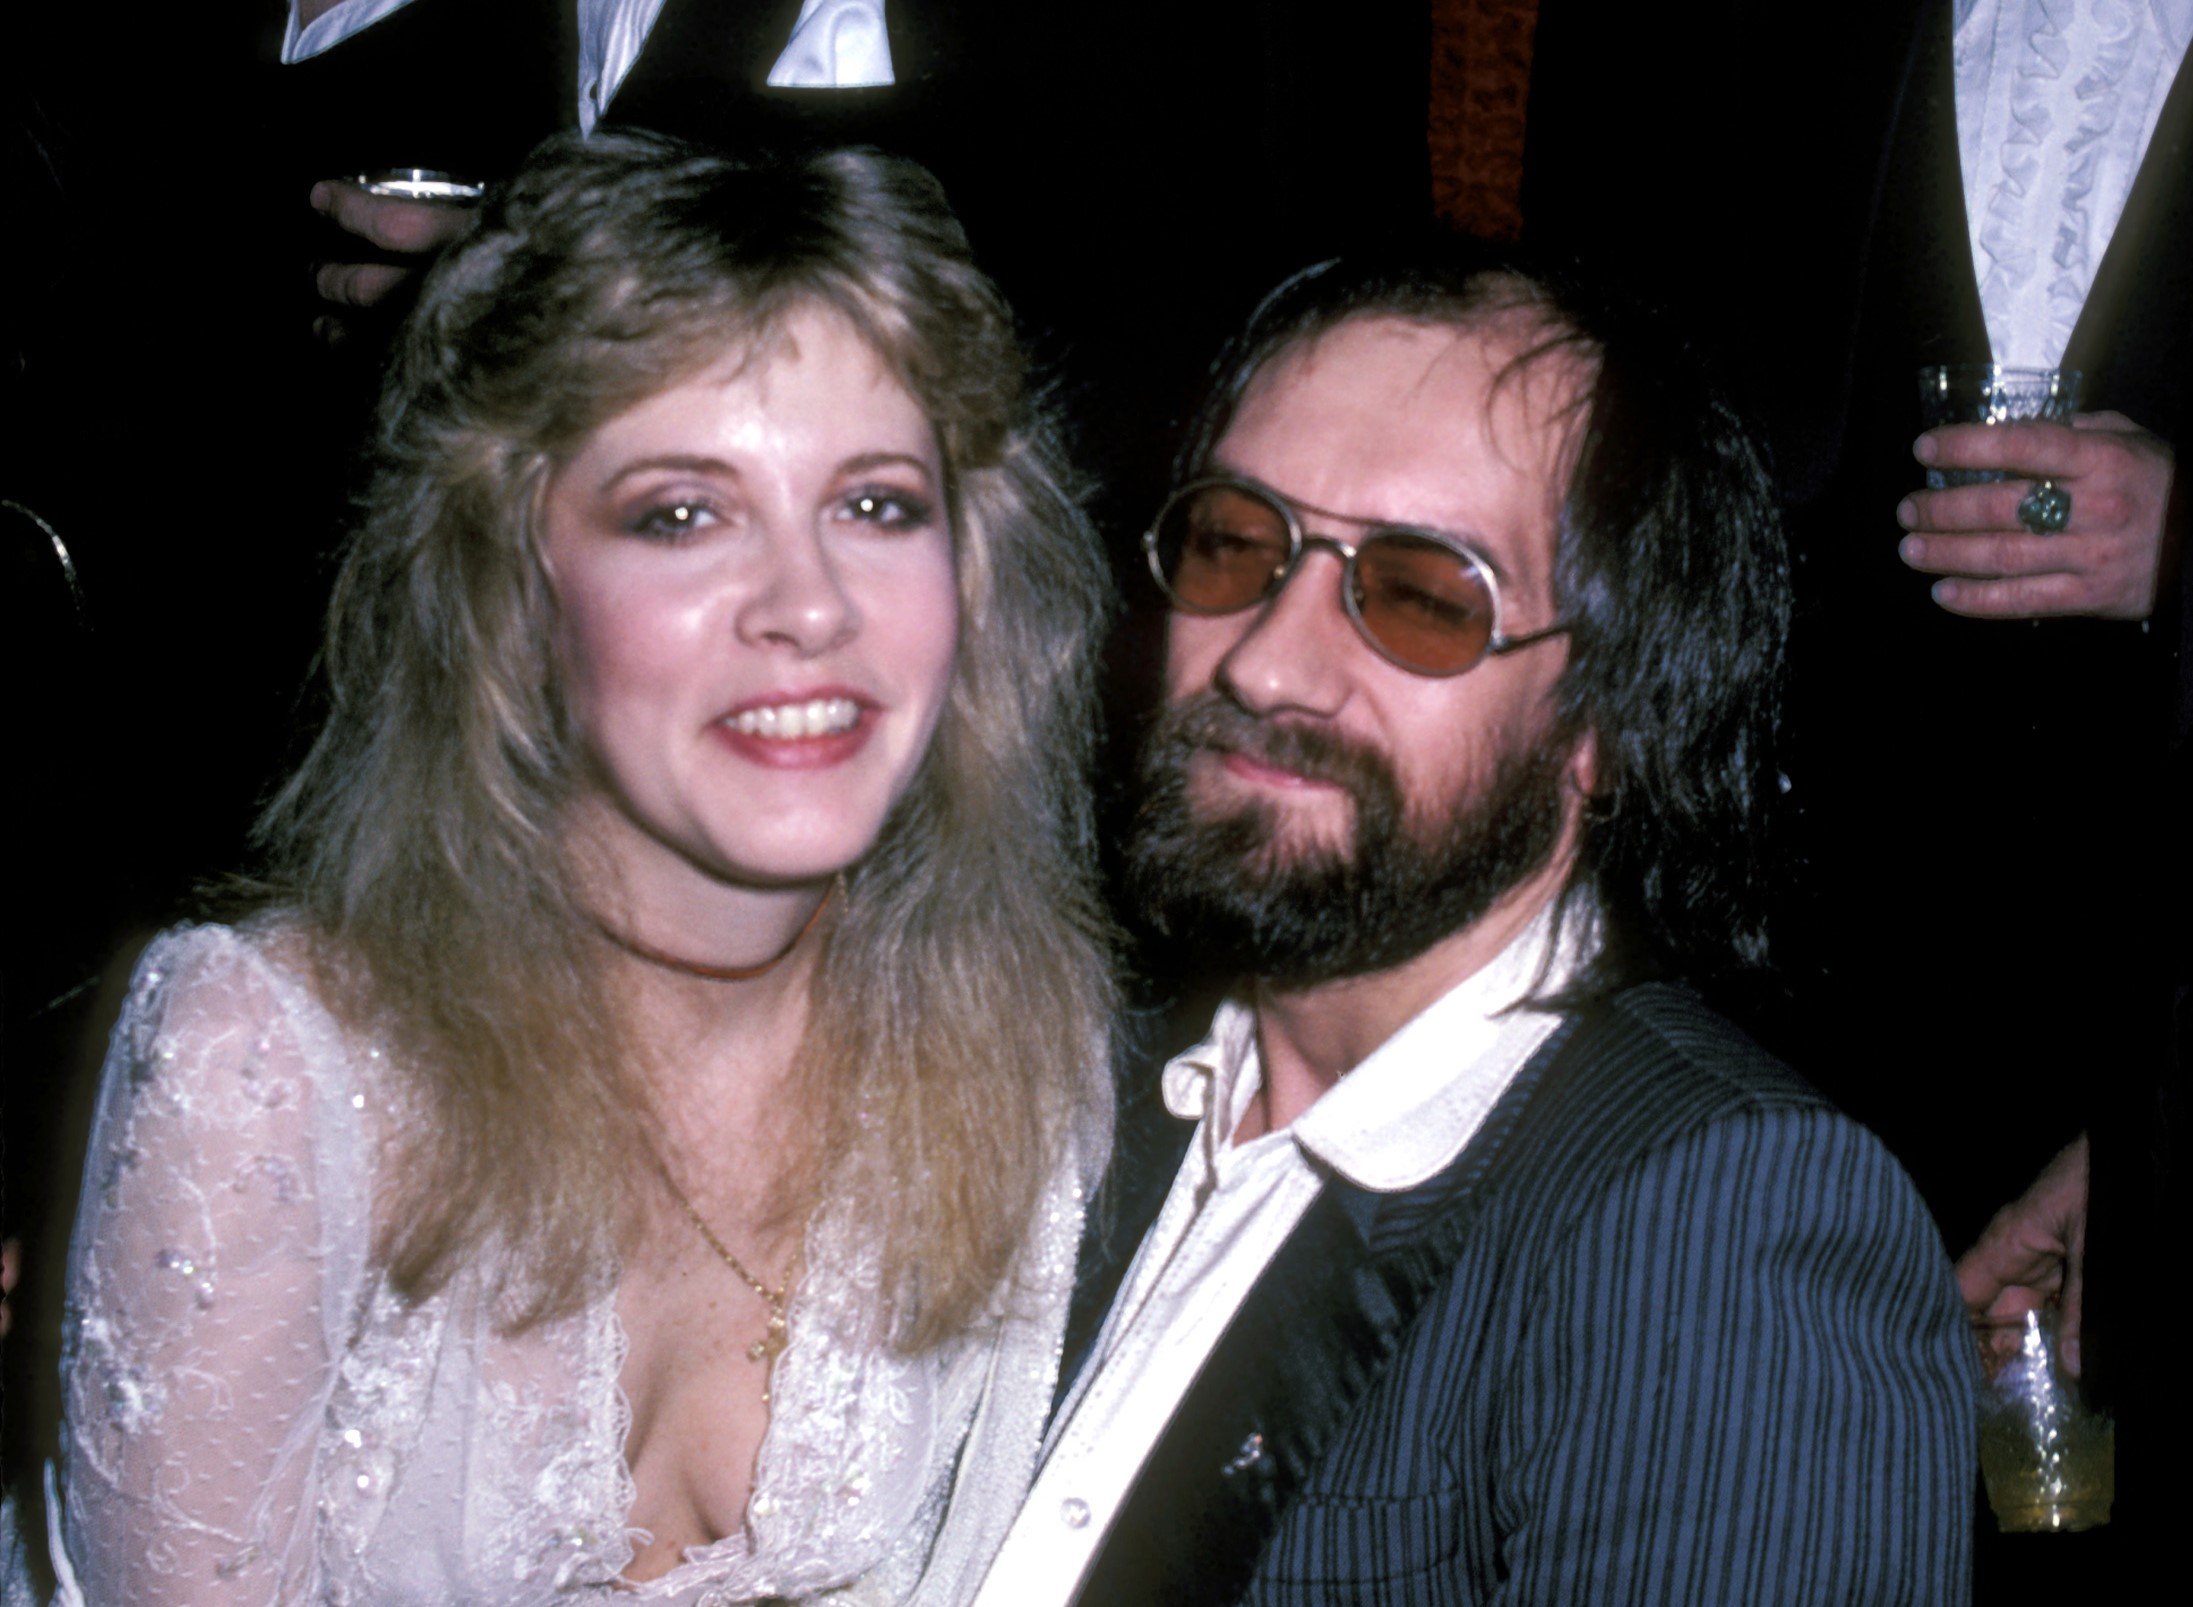 Stevie Nicks wears a white dress and sits on Mick Fleetwood's lap. He wears a blue suit and sunglasses.